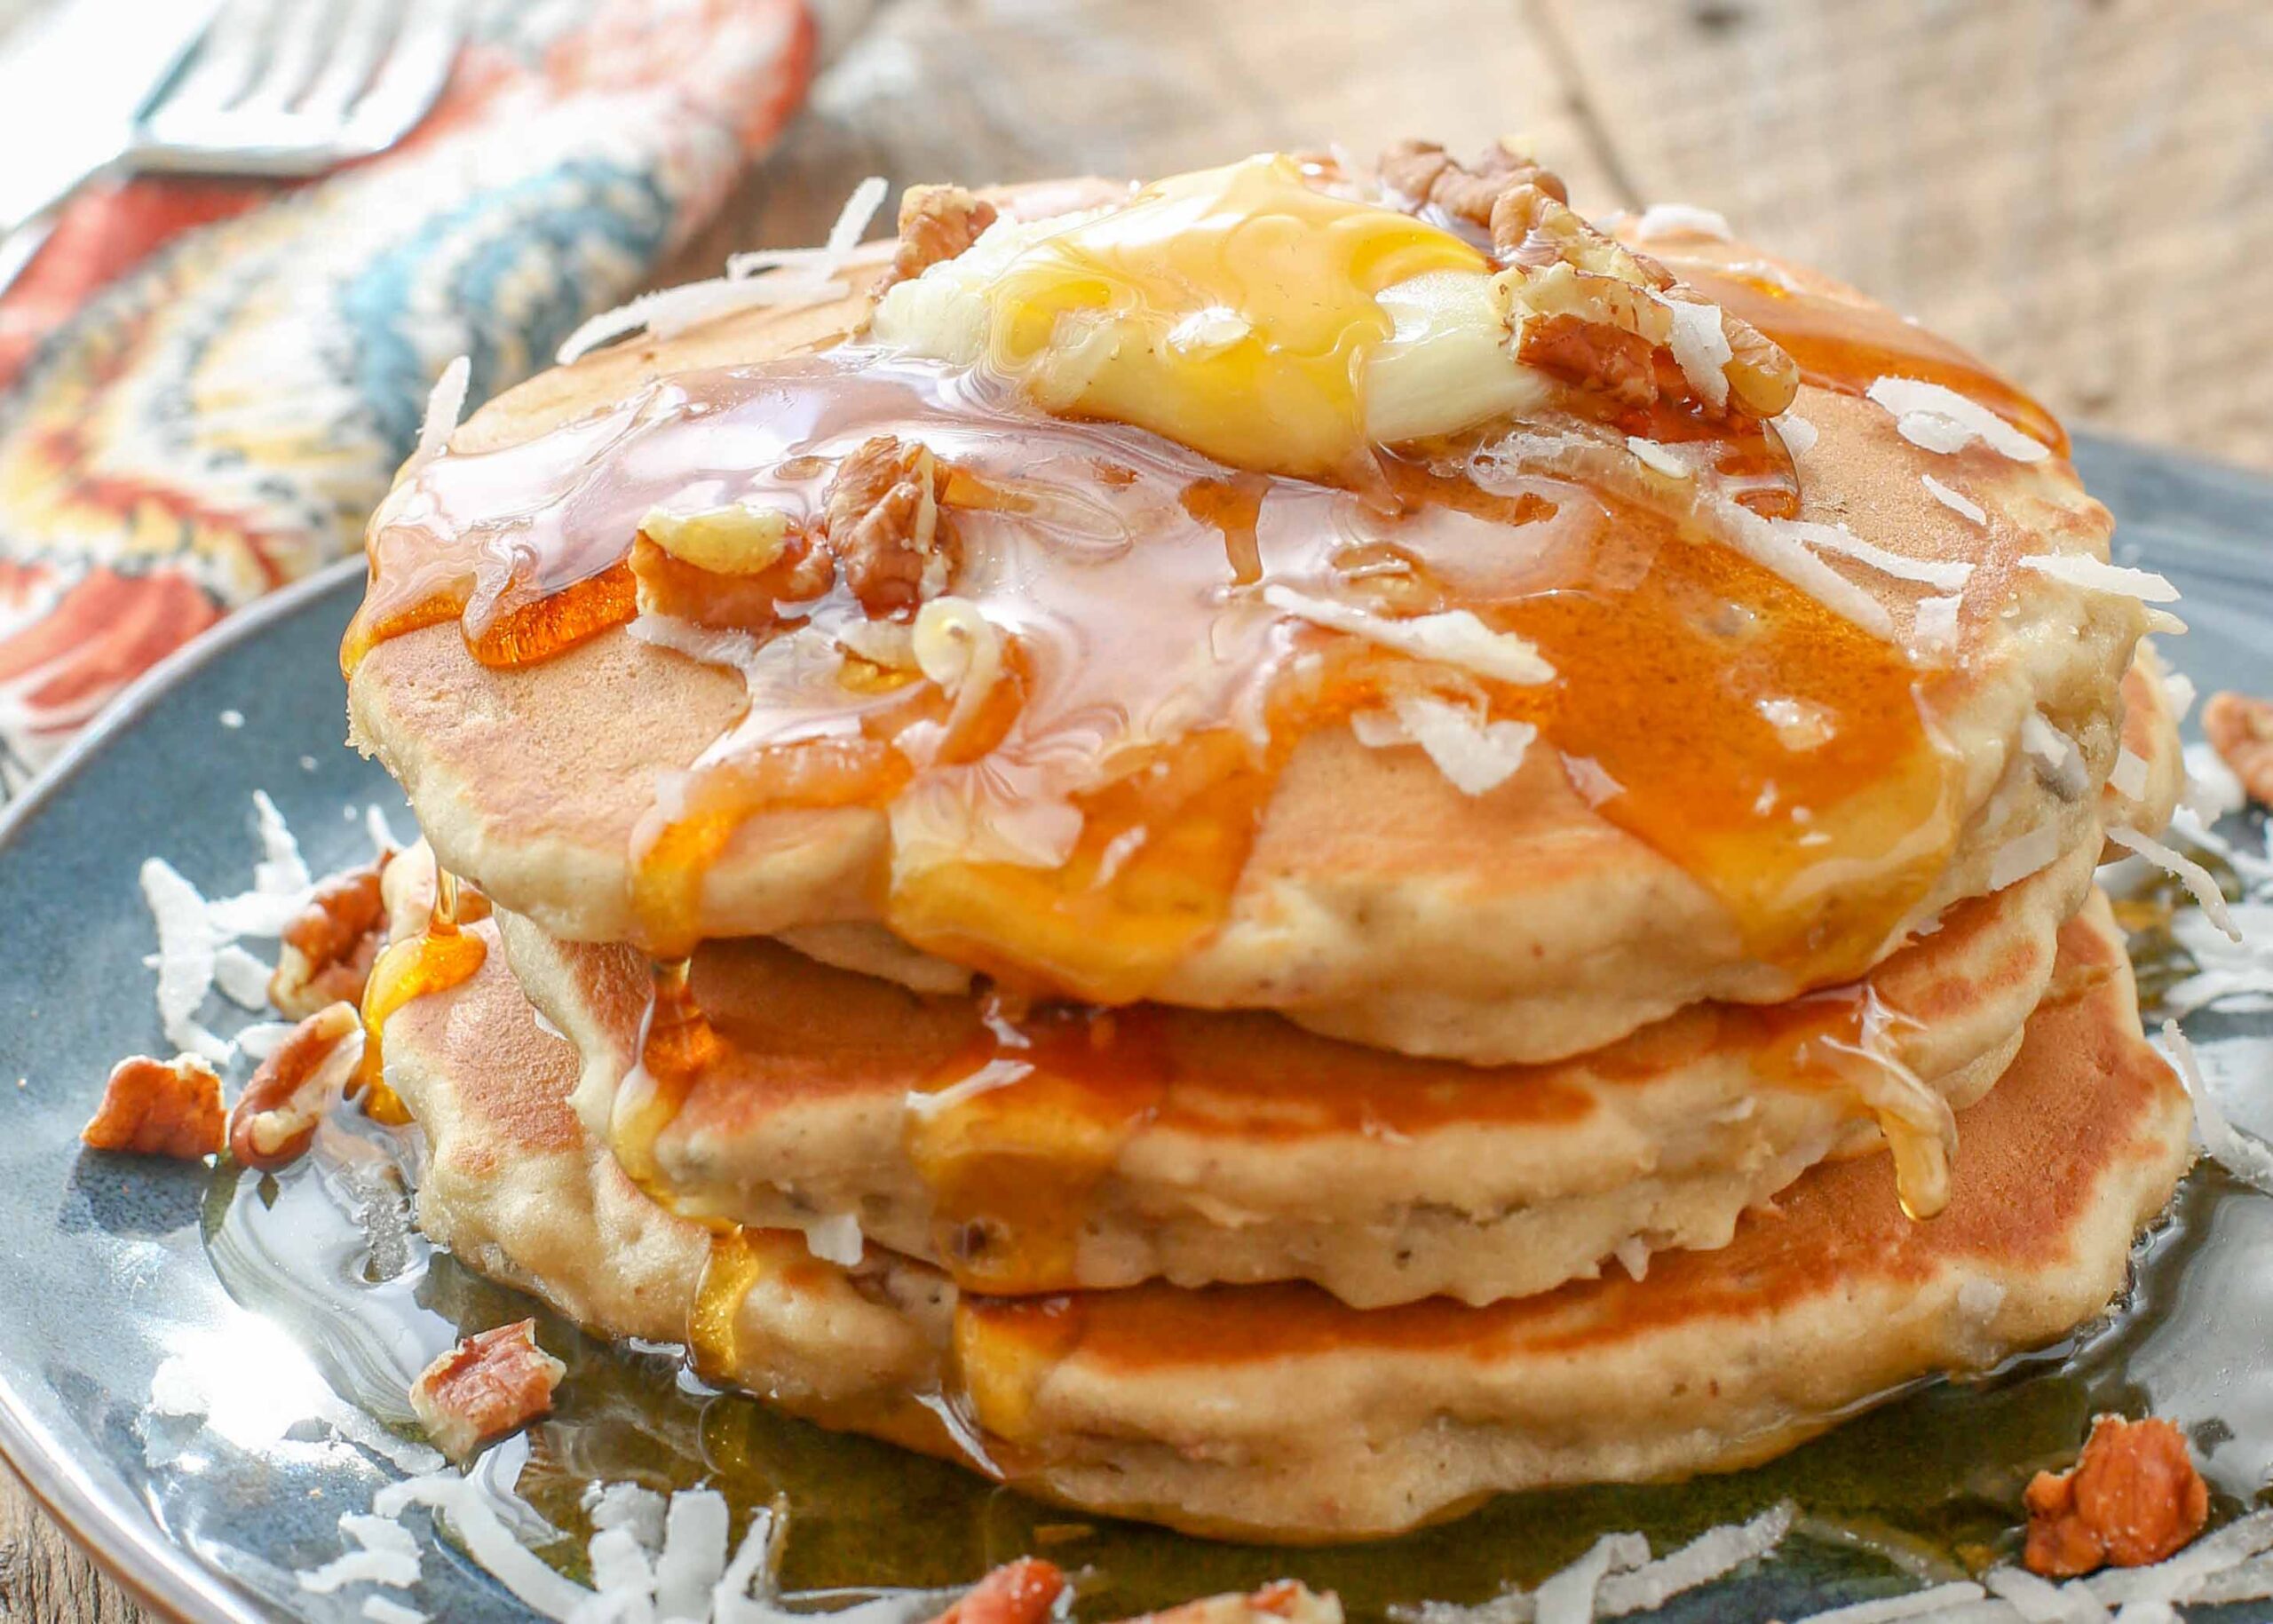 Coconut pancakes with caramelised bananas